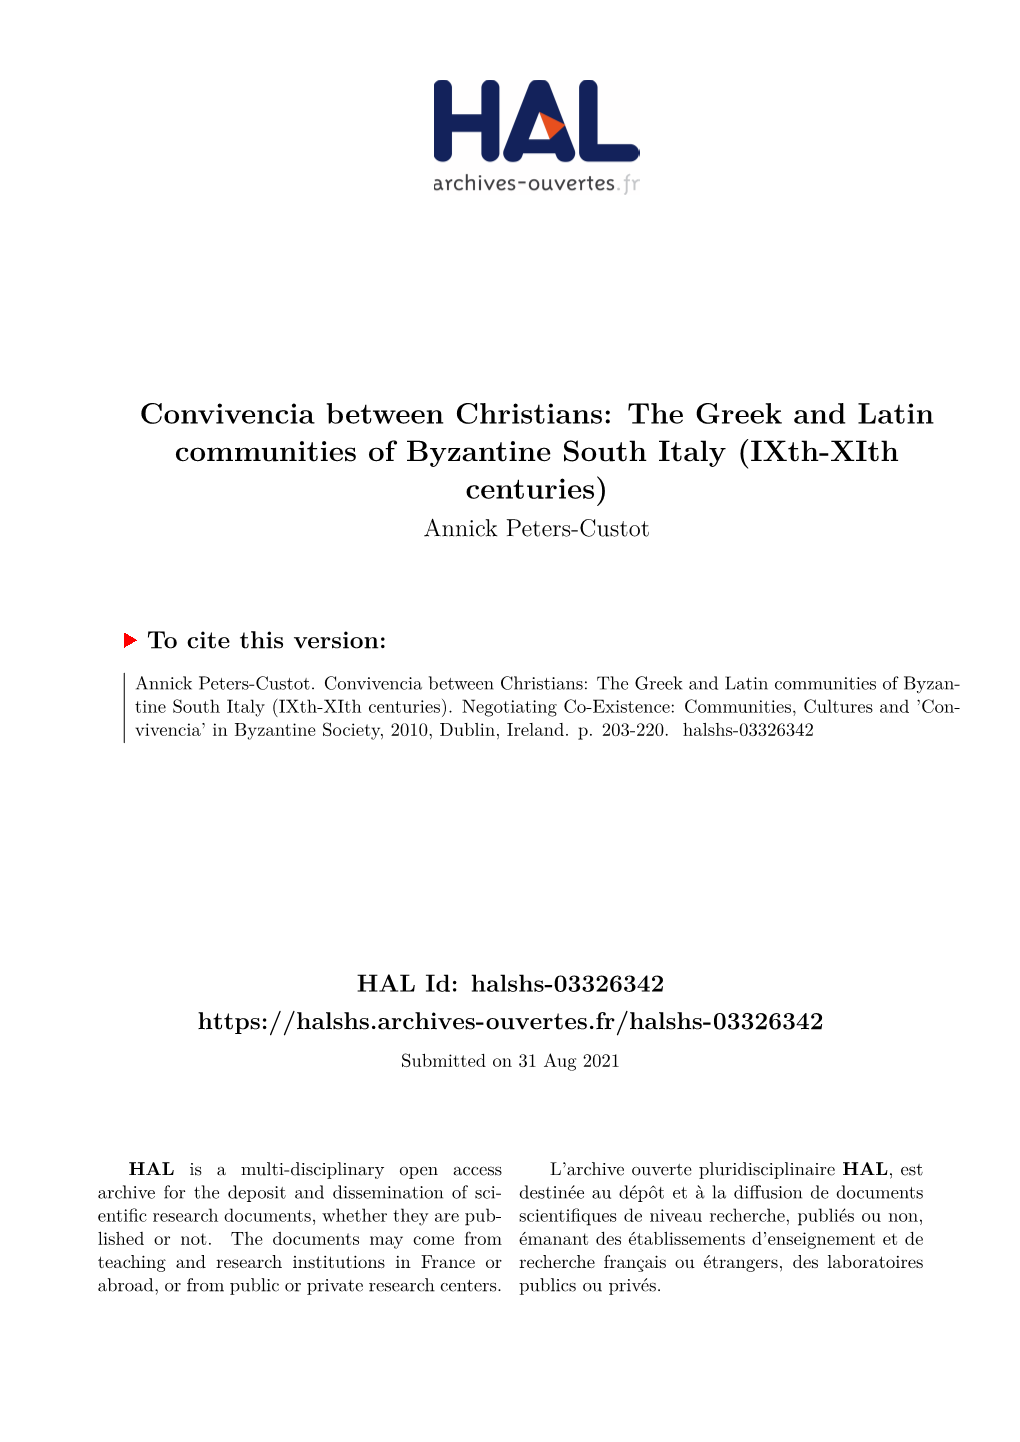 The Greek and Latin Communities of Byzantine South Italy (Ixth-Xith Centuries) Annick Peters-Custot